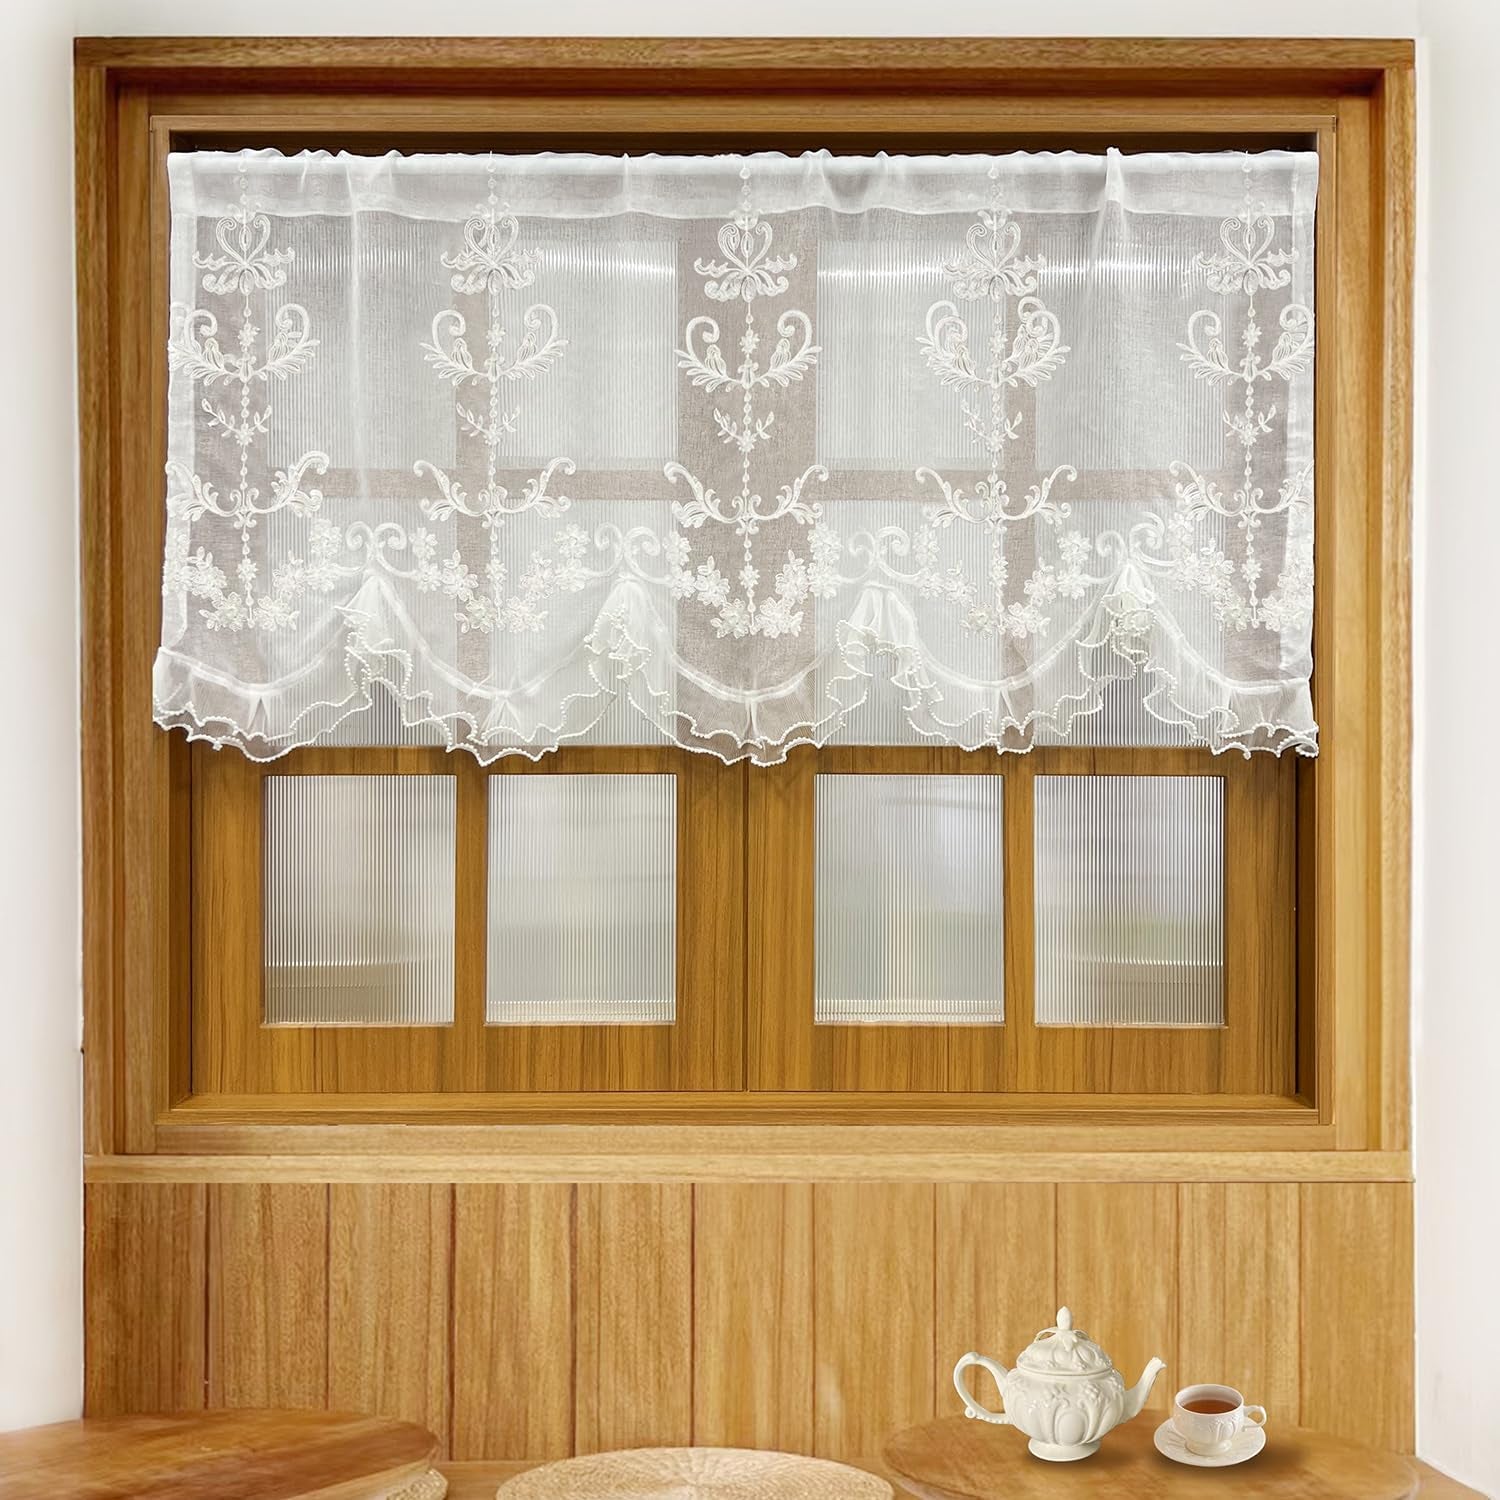 1 Panel Exquisite Floral Embroidery Sheer Curtain with Beaded Ruffled Lace Princess Style Linen Short Curtain Valance Tier for Doorway Kitchen Bathroom Window, Rod Pocket Top (White,W78 X L24 Inches)